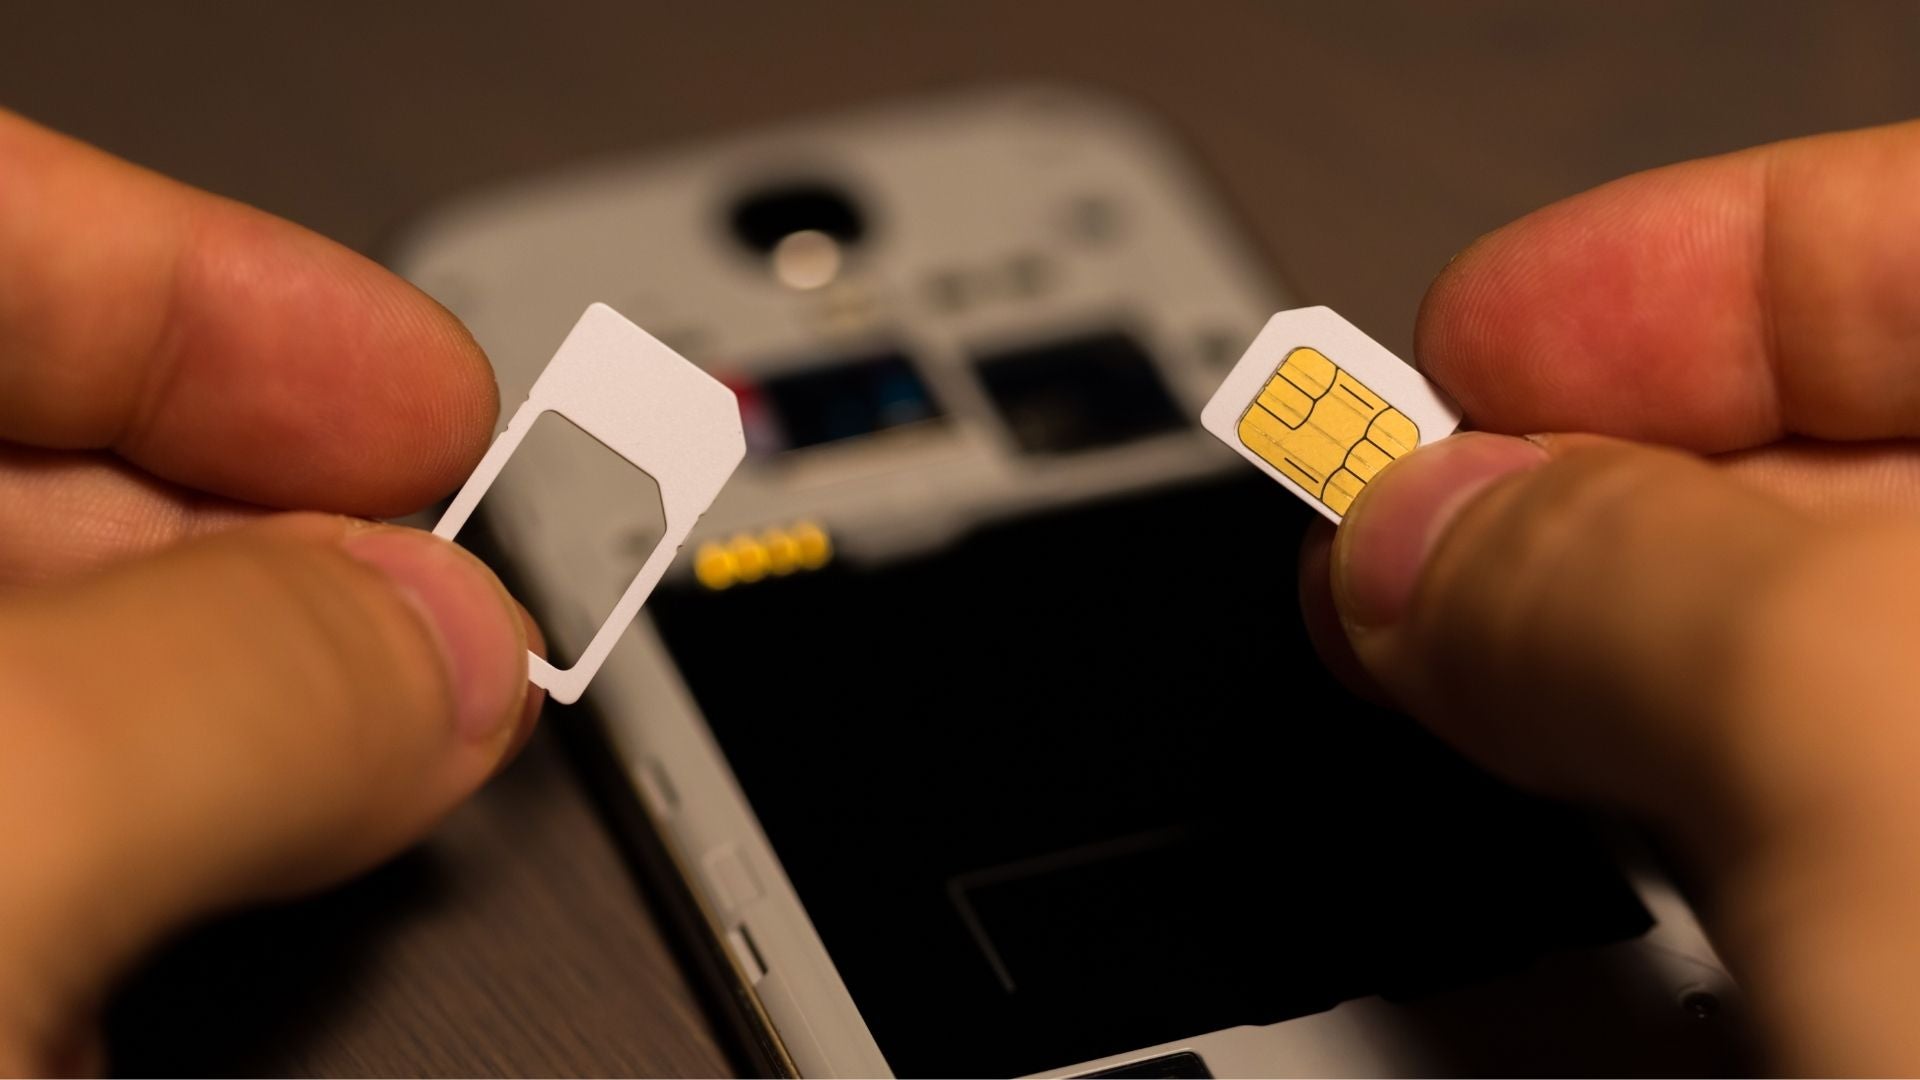 how-to-put-sim-card-in-android-phone